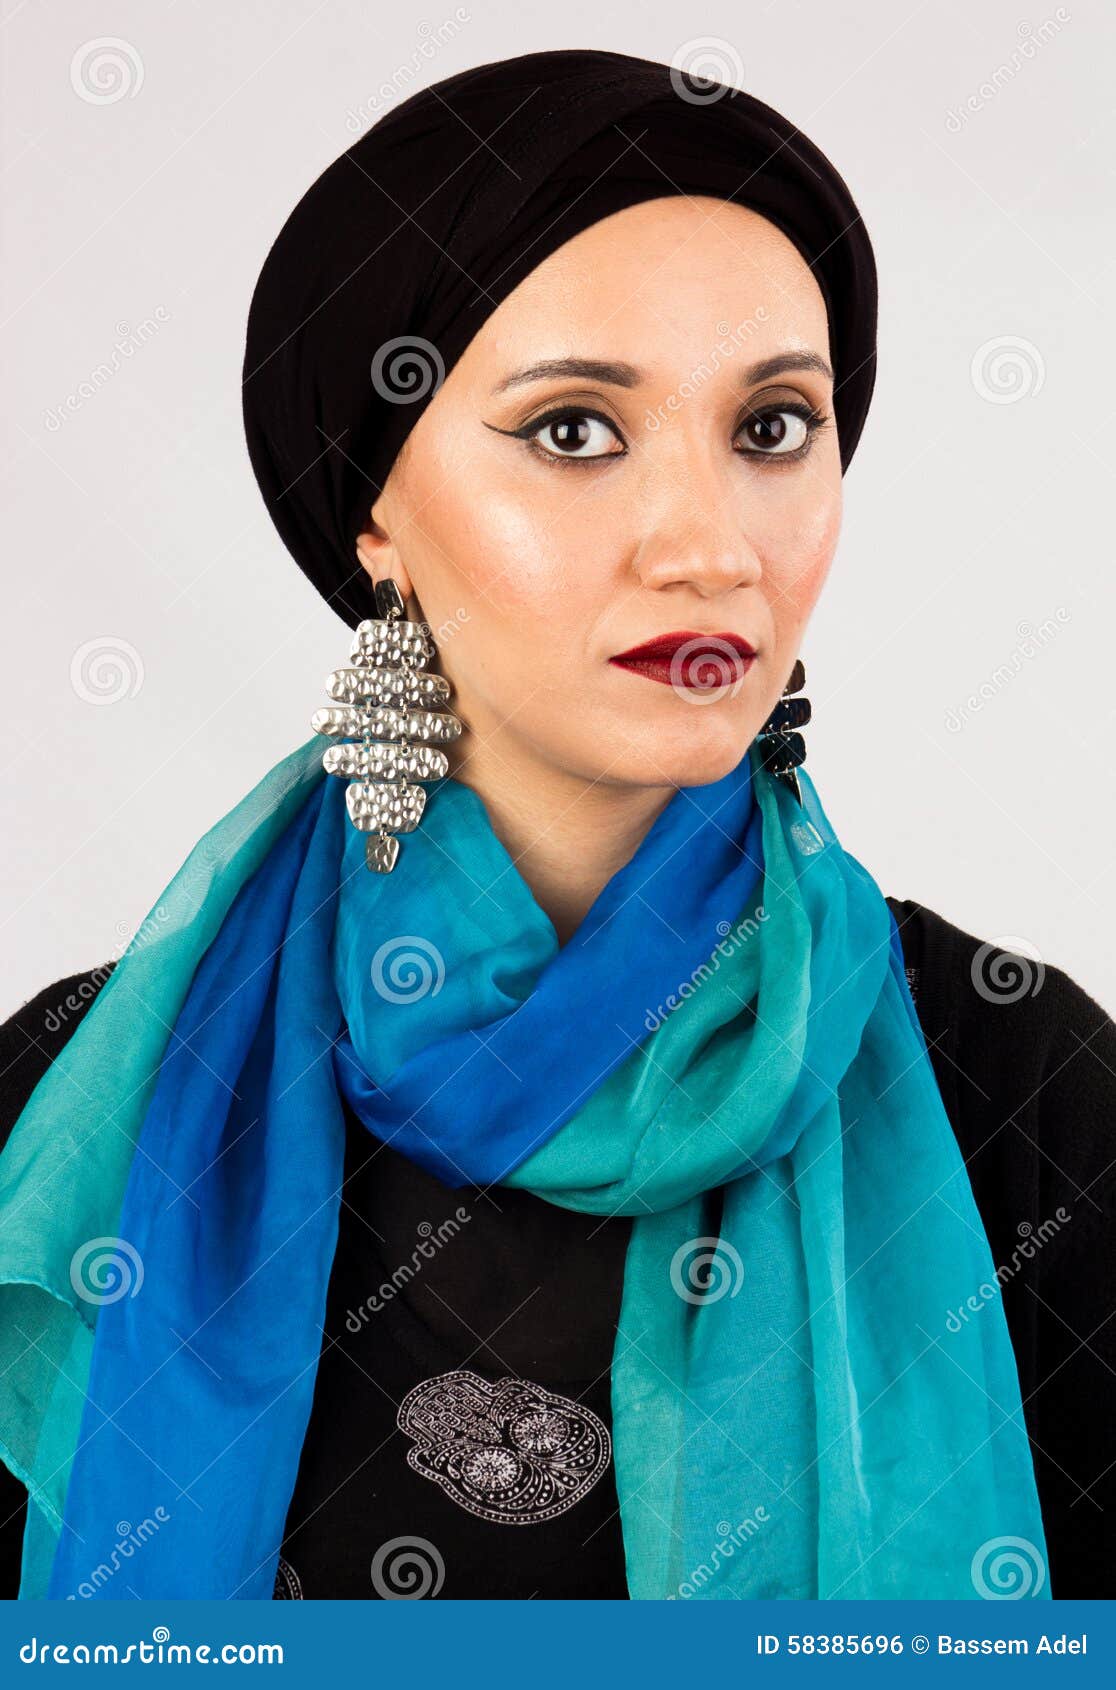 Woman In Hijab And Colorful Scarf Stock Photo - Image 